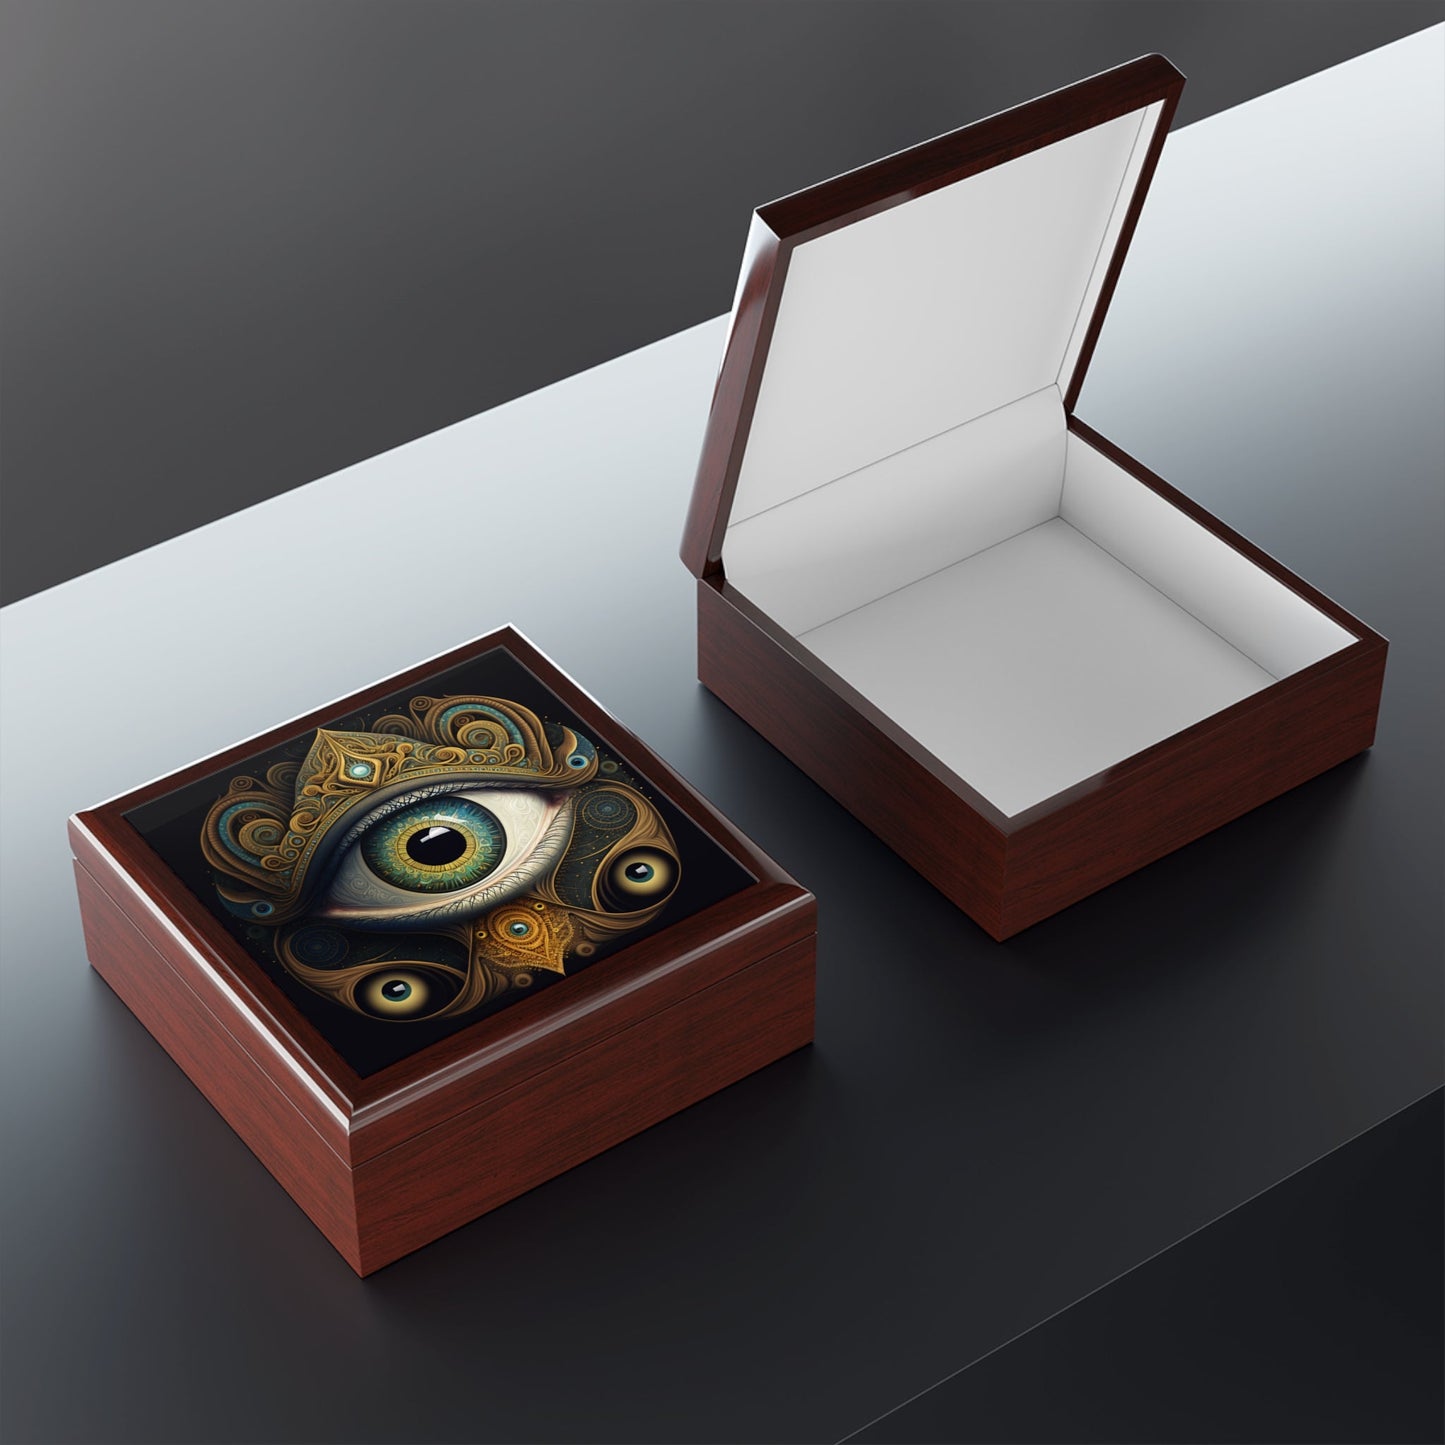 All-Seeing Third Eye Wood Keepsake Jewelry Box with Ceramic Tile Cover